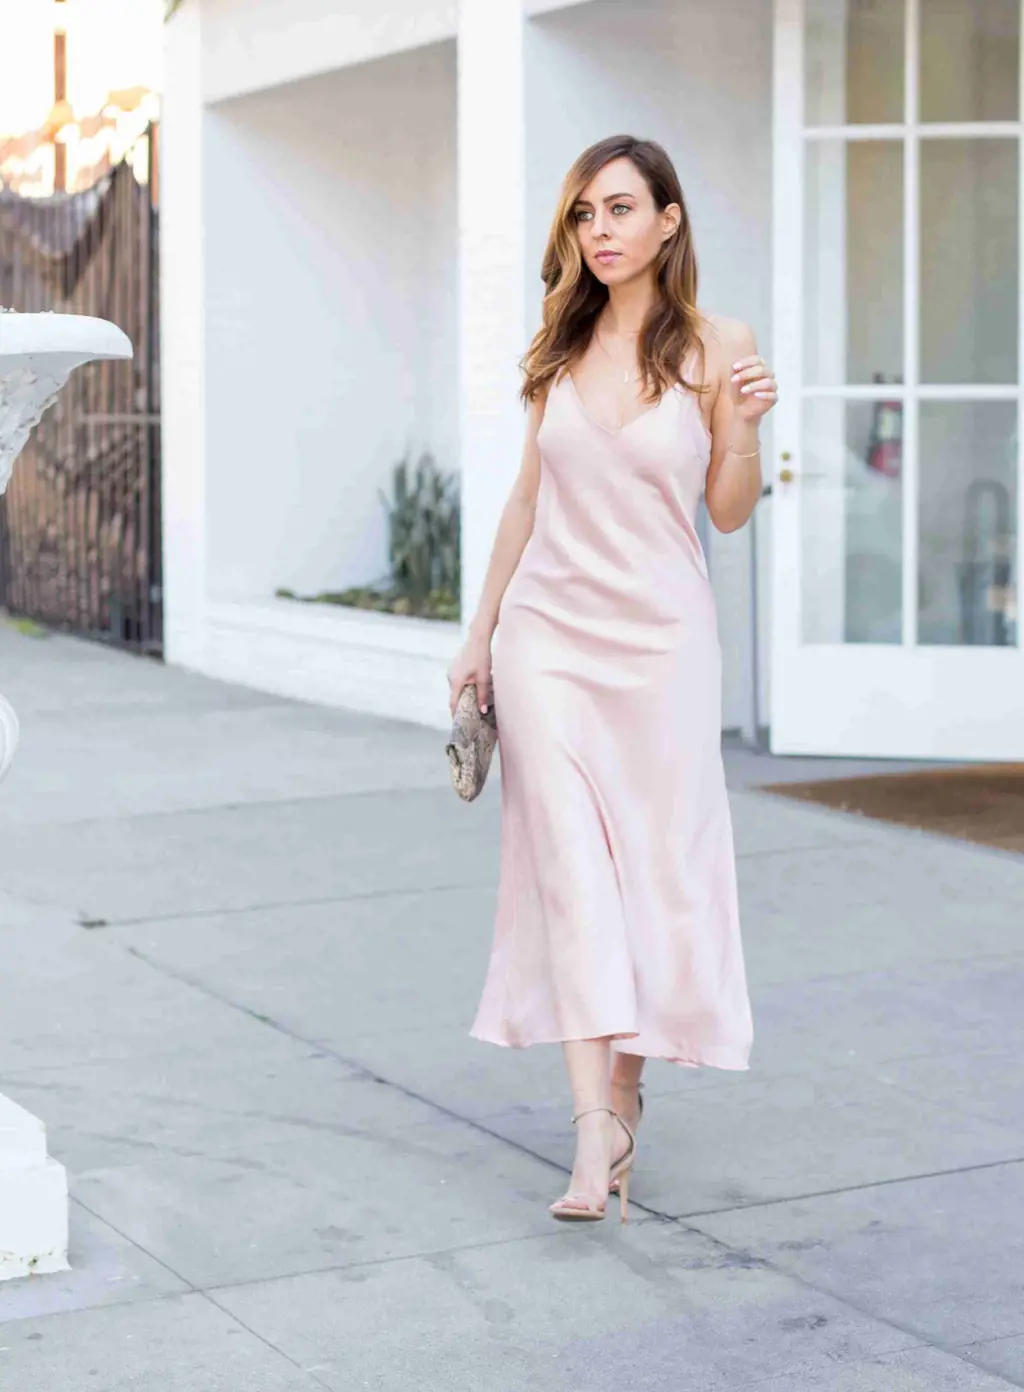 The Best Options For Slip Under Dresses: What To Wear For A Smooth ...